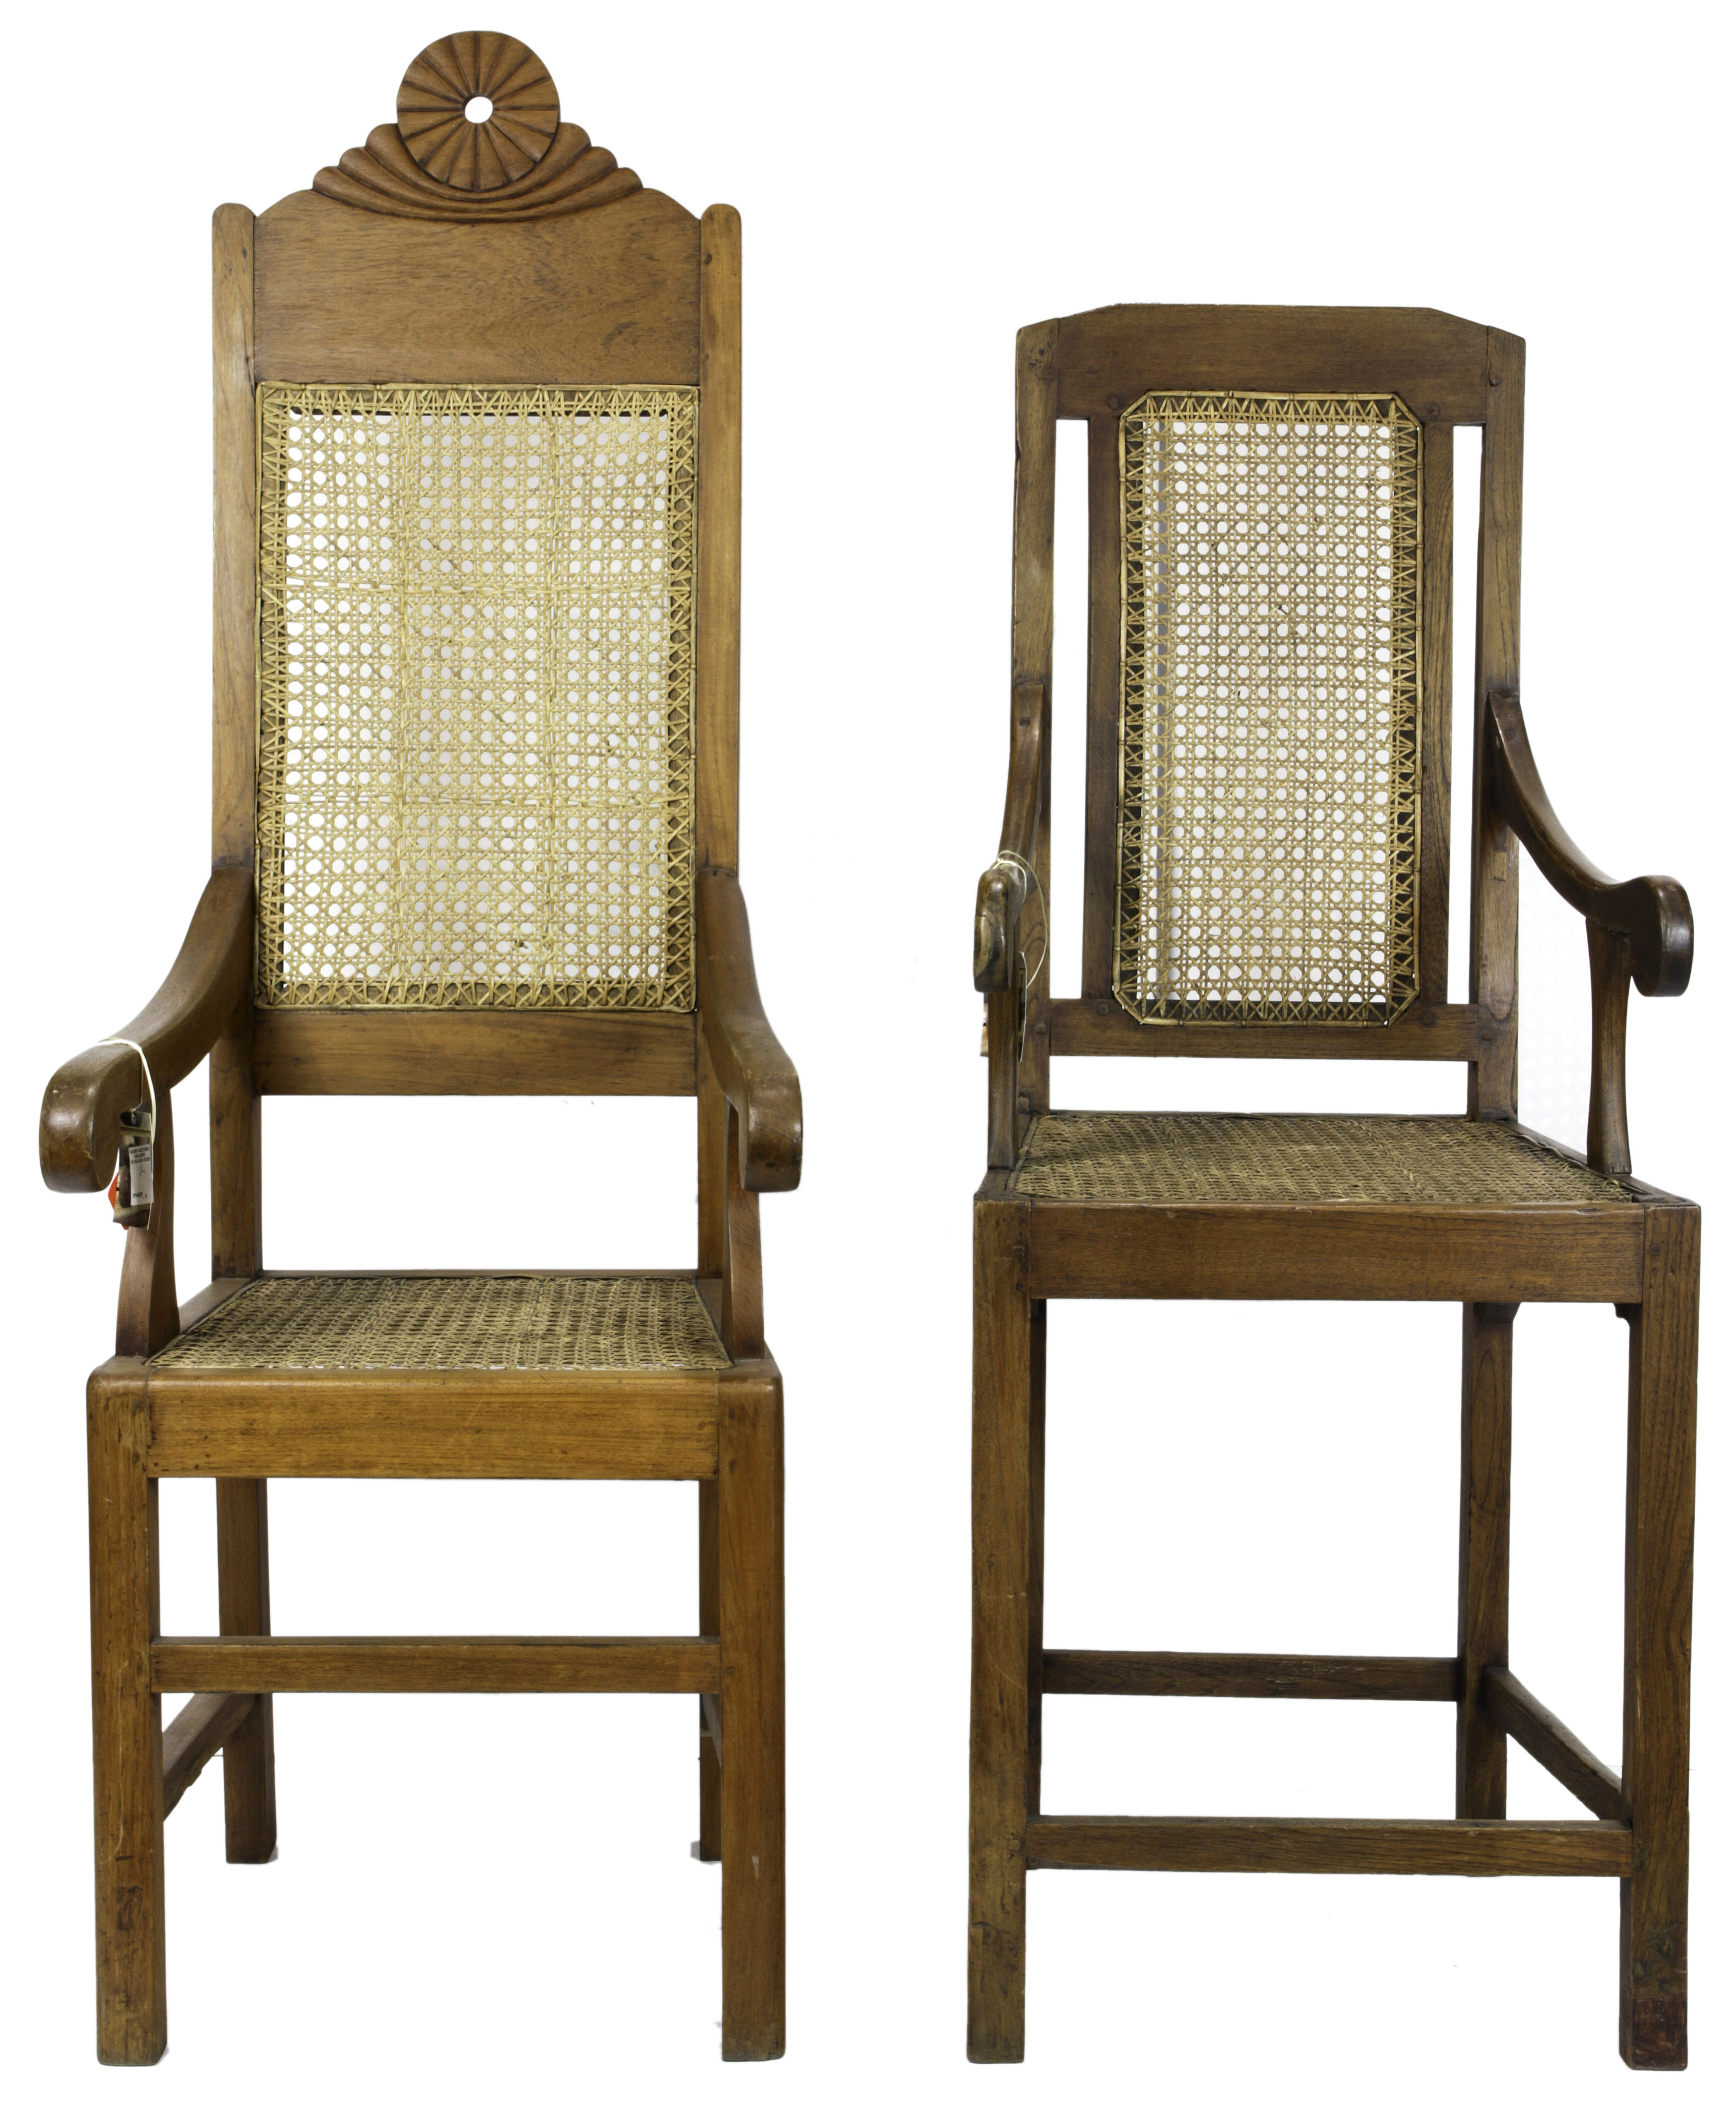  LOT OF 2 BADMINTON REFEREE CHAIRS 3a4fa6